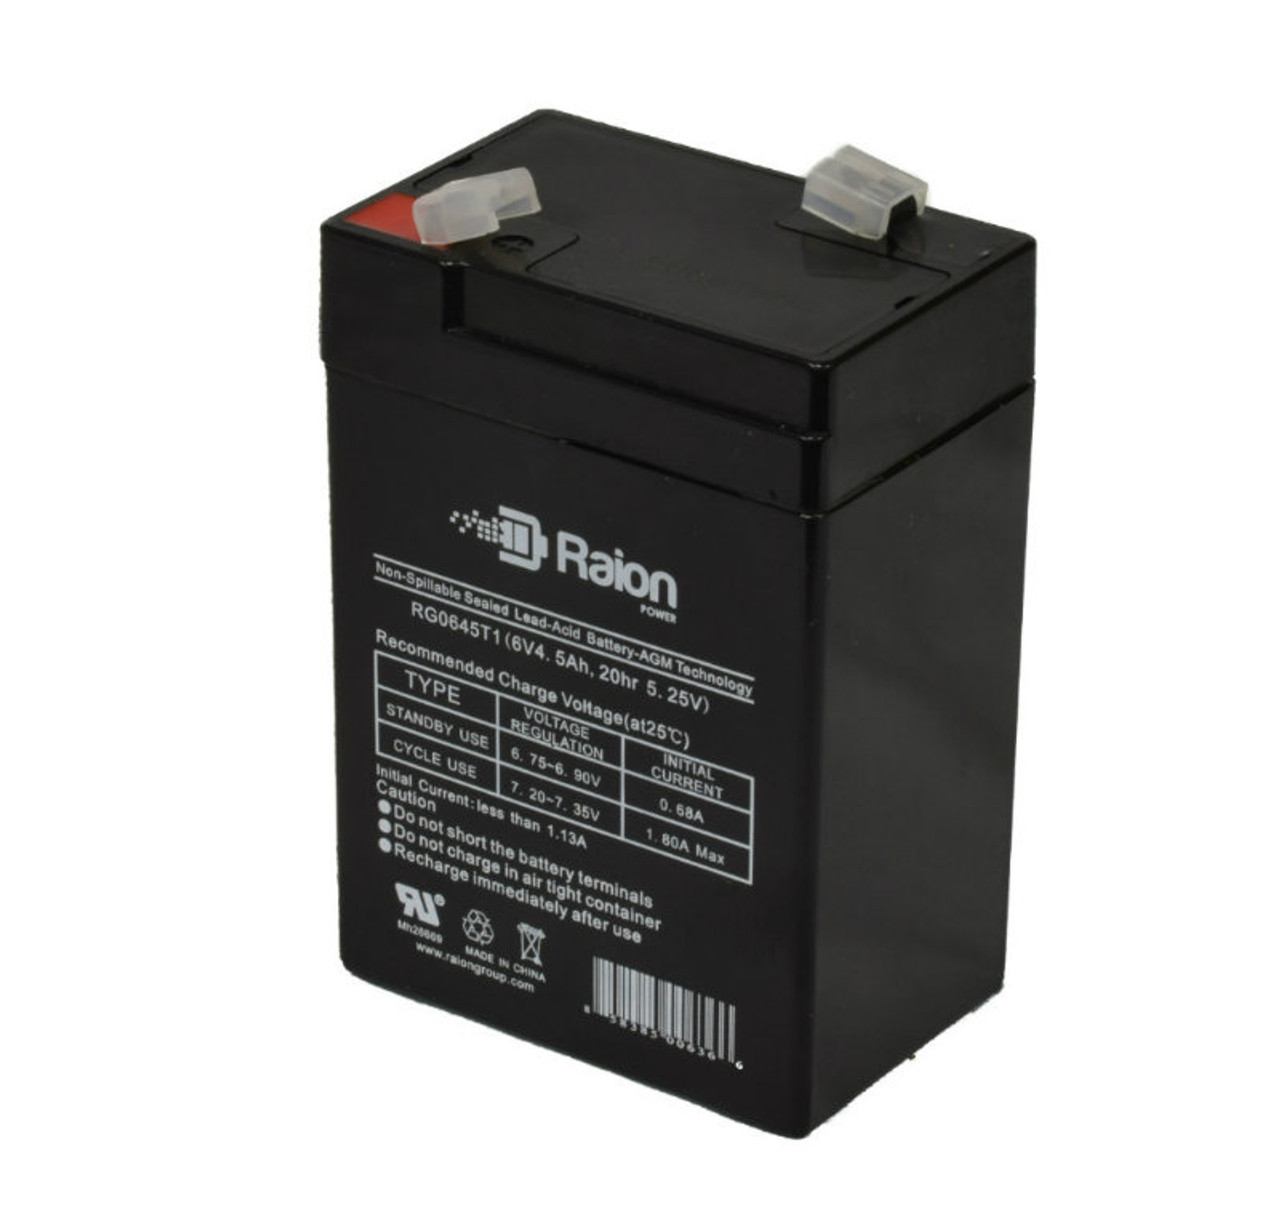 Raion Power RG0645T1 6V 4.5Ah Replacement Battery Cartridge for Philips Medical Systems HC102ES Old Style